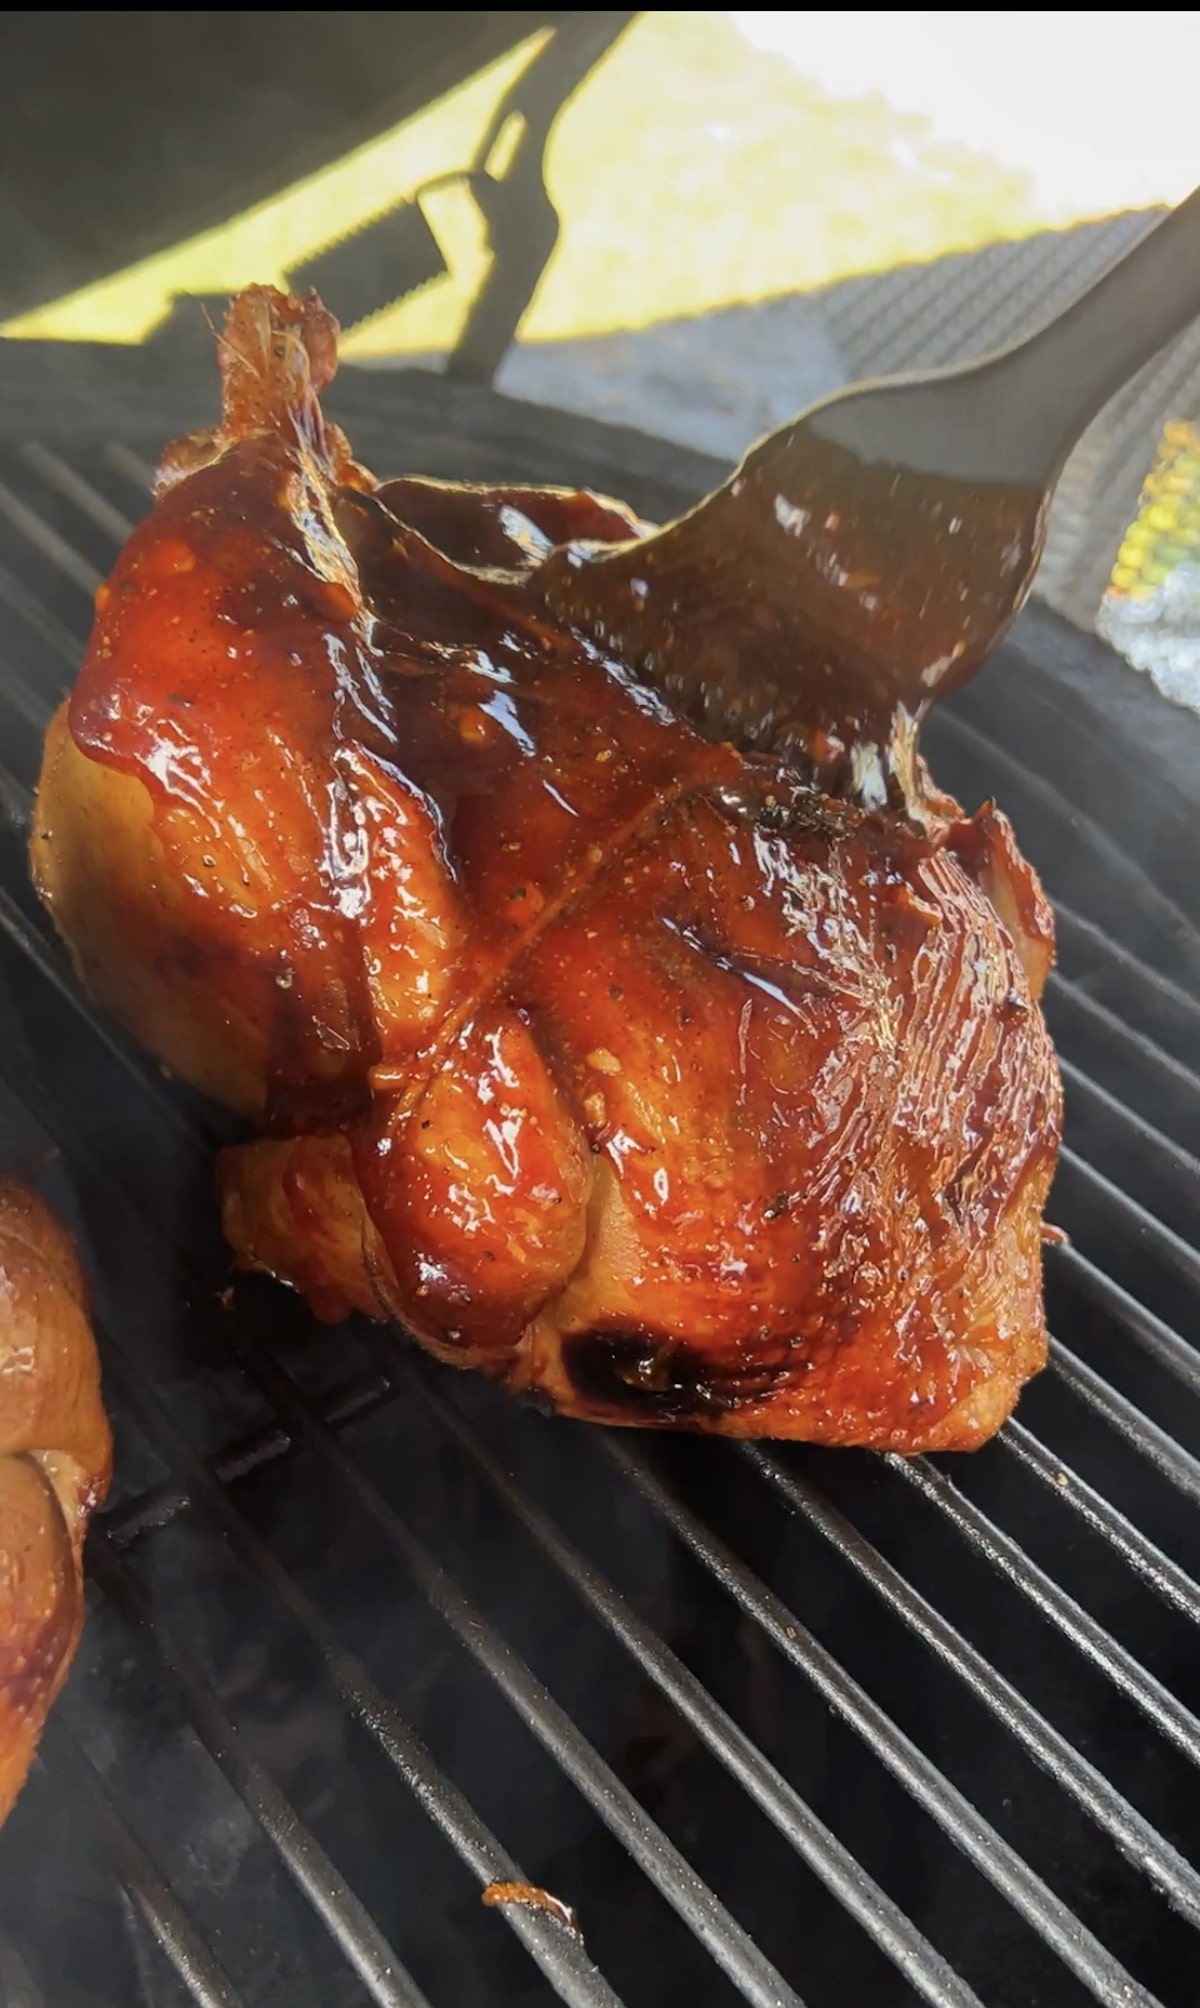 Brushing bbq sauce on whole chicken.